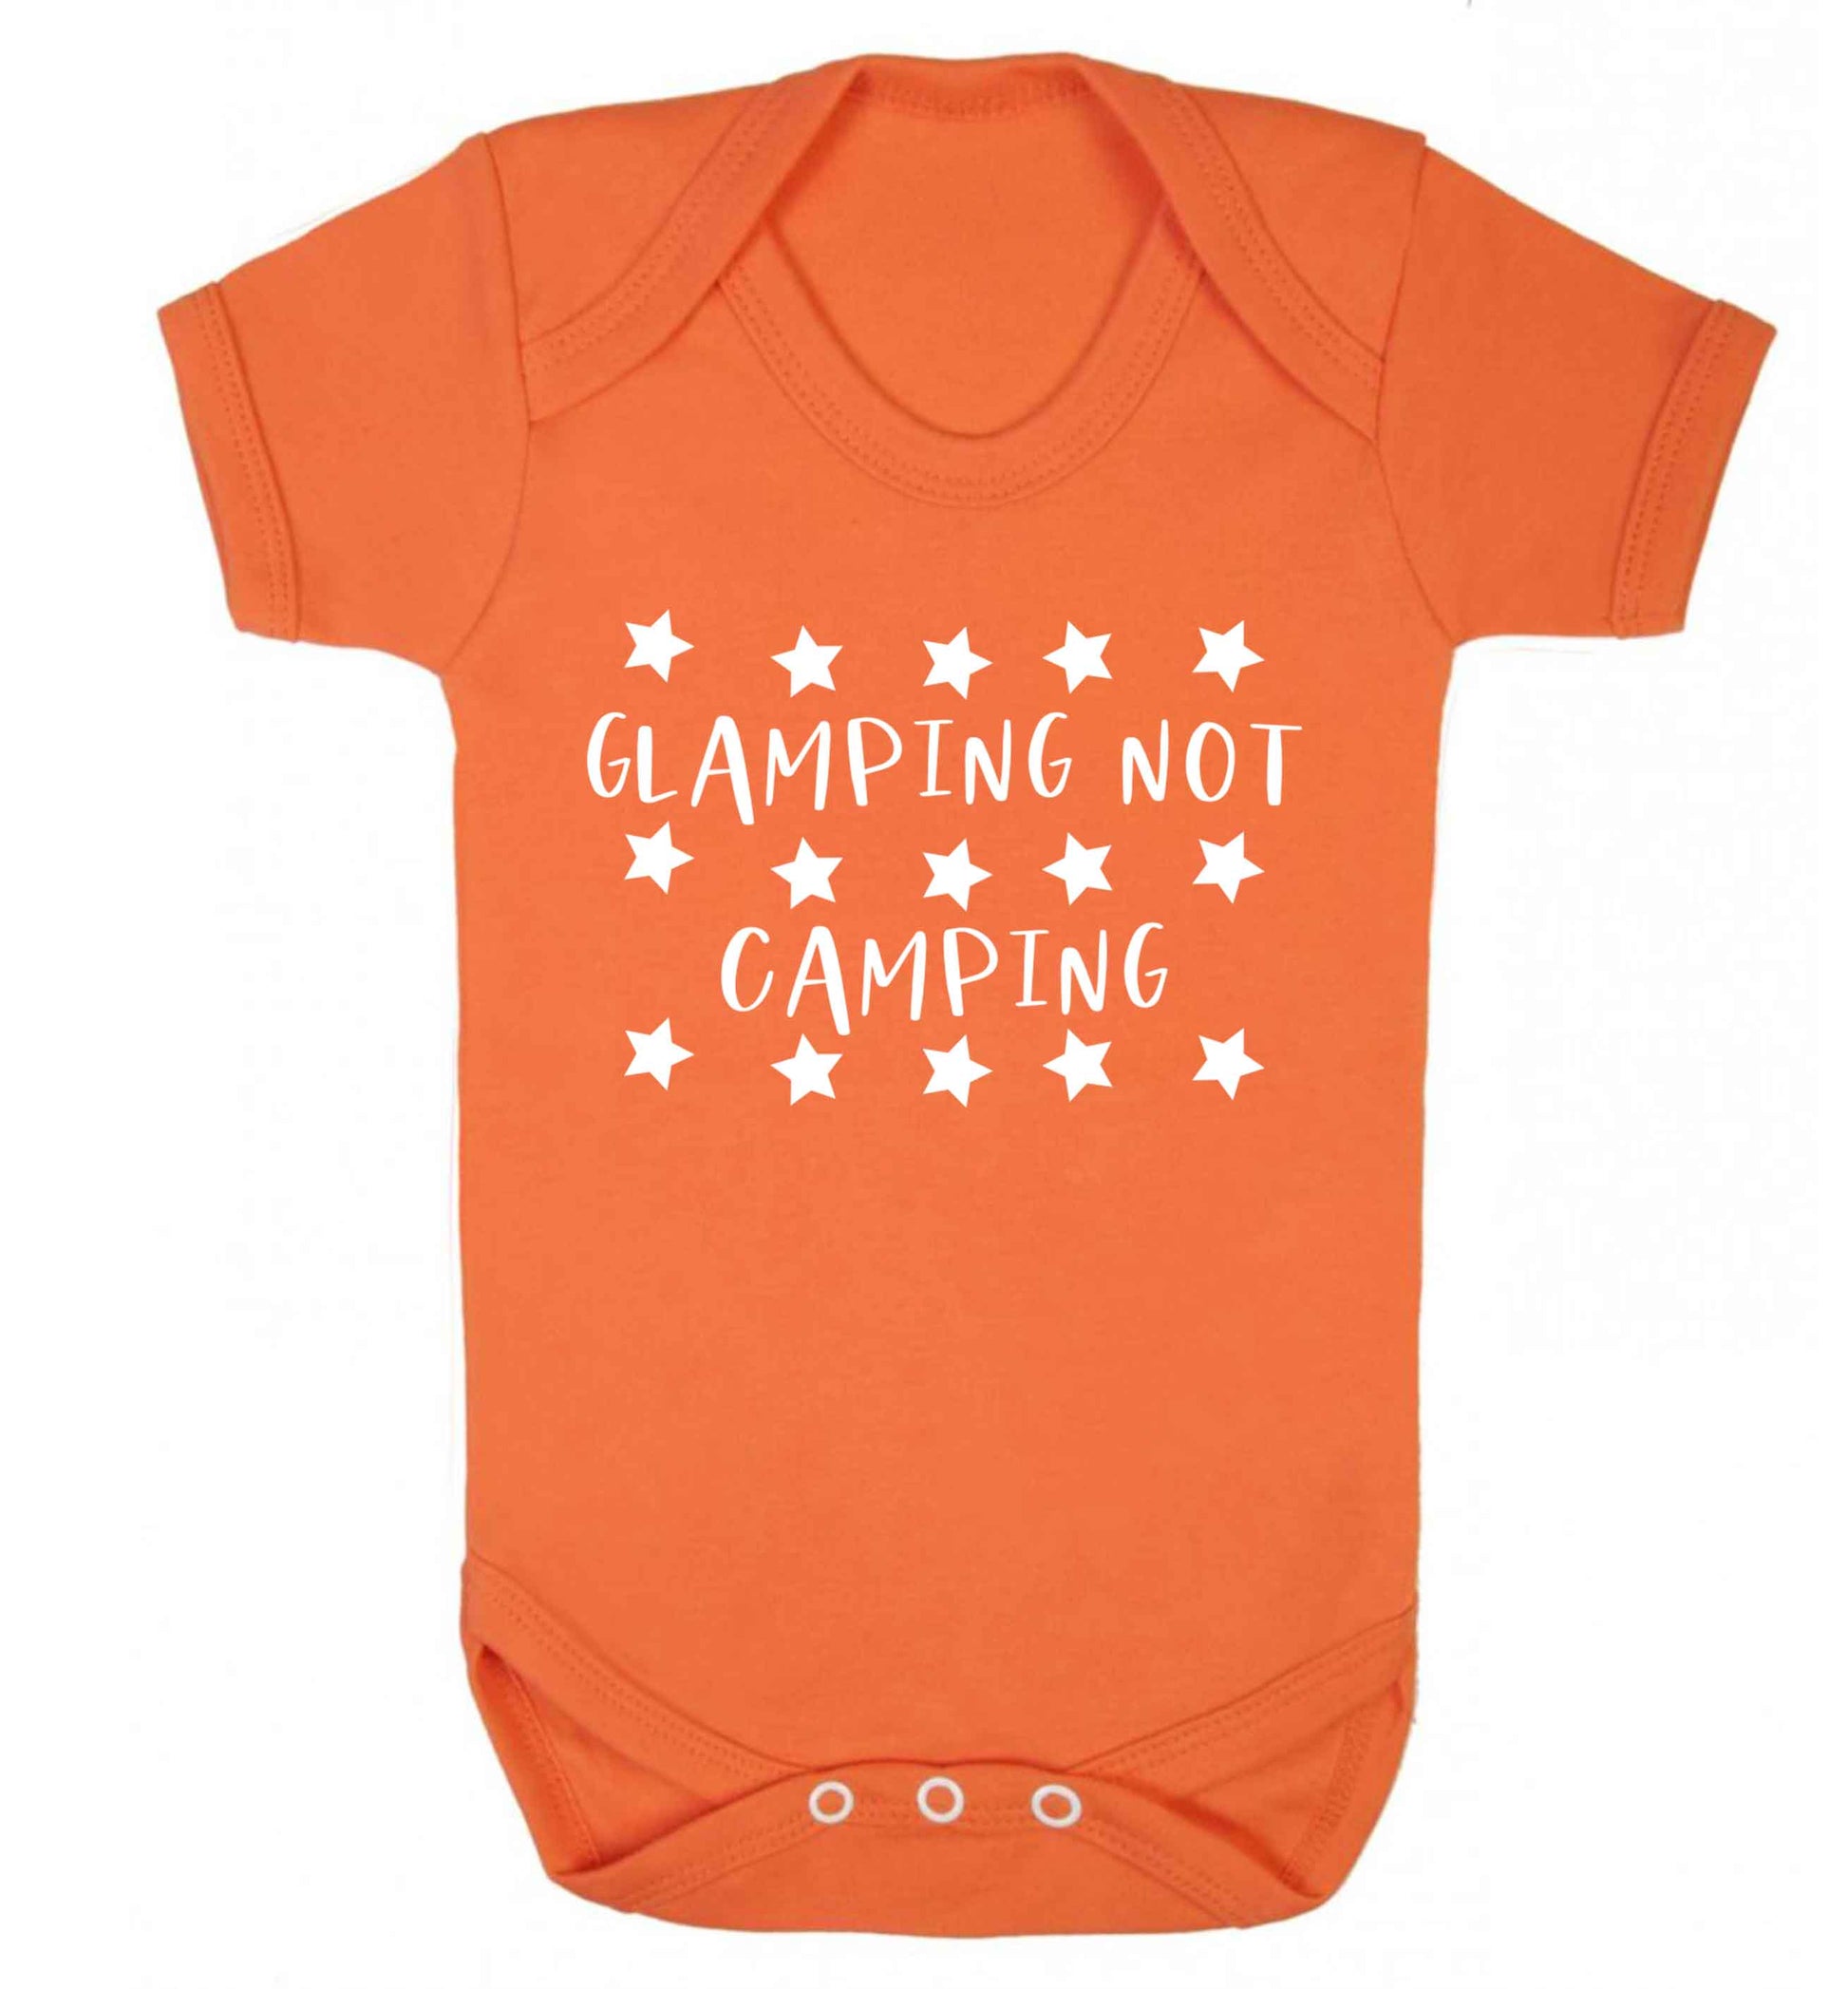 Glamping not camping Baby Vest orange 18-24 months